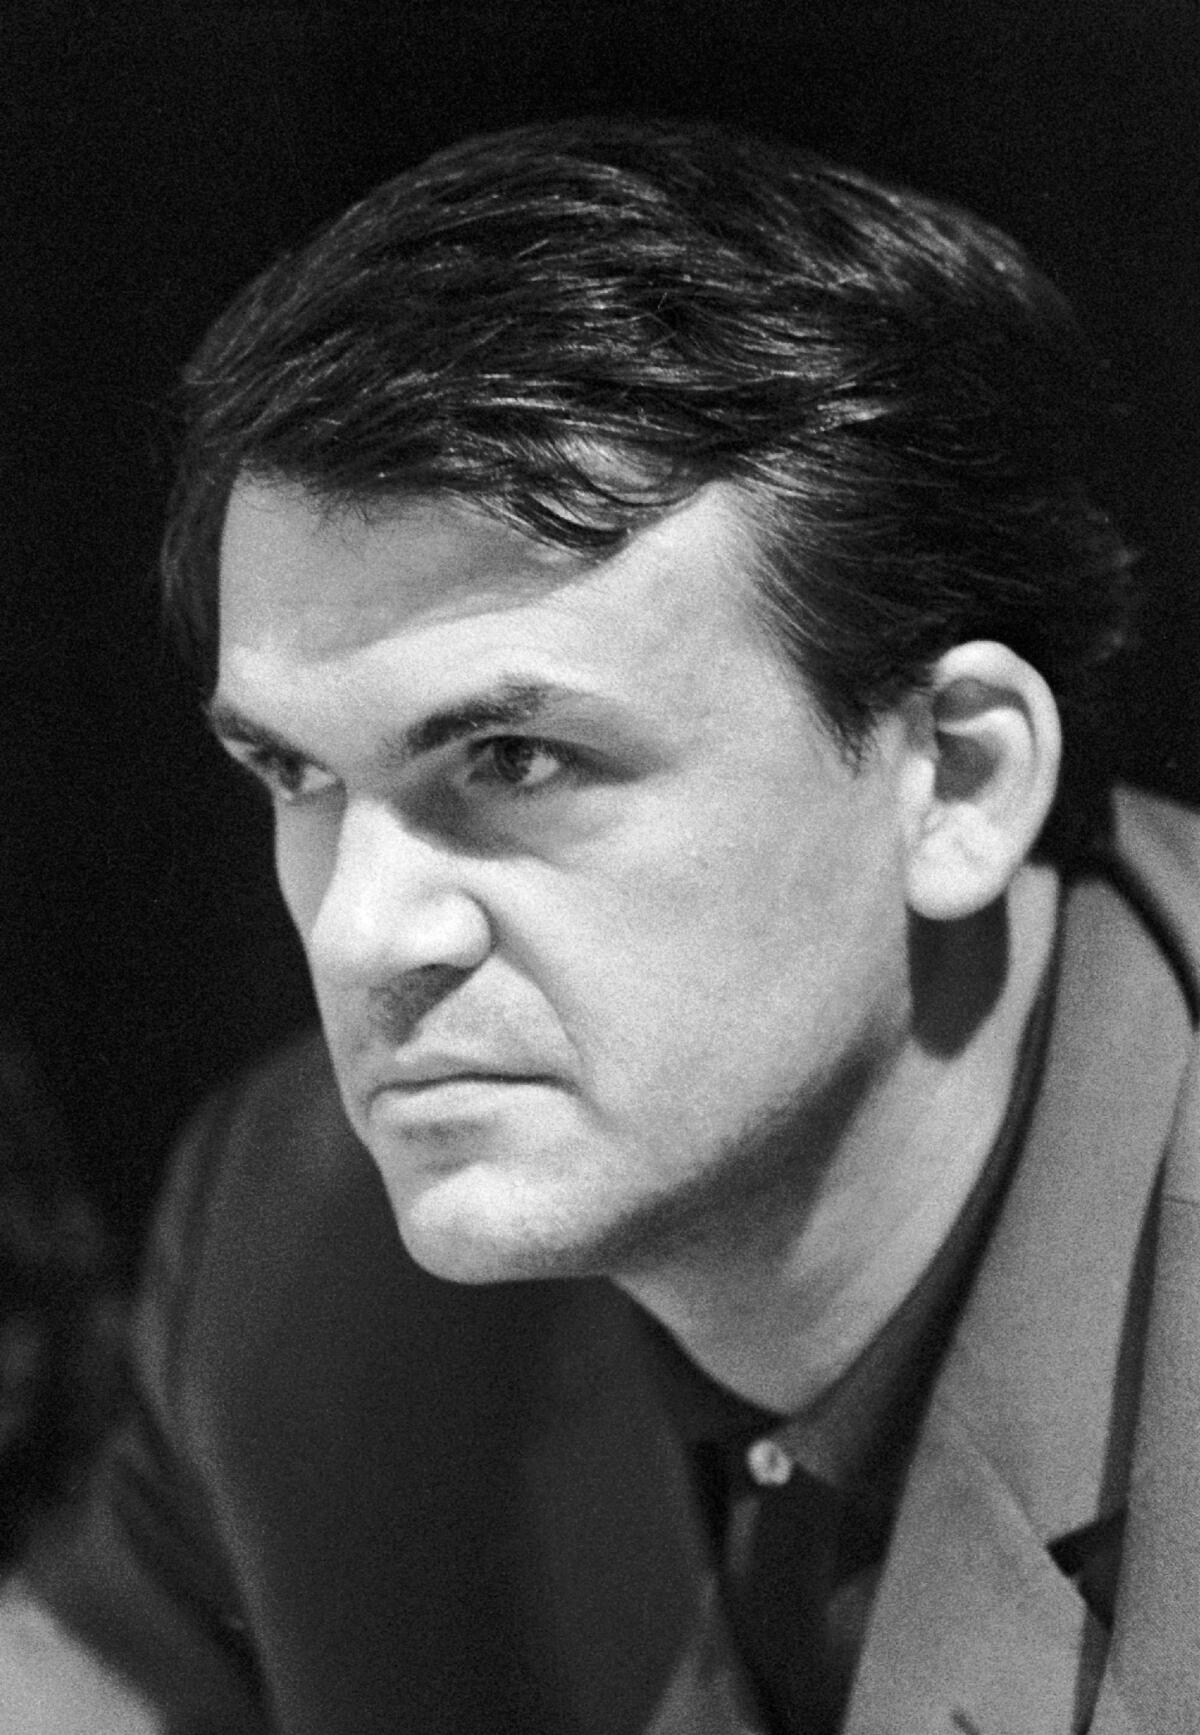 A black-and-white headshot of Milan Kundera as a young man in 1967, wearing a black blazer.